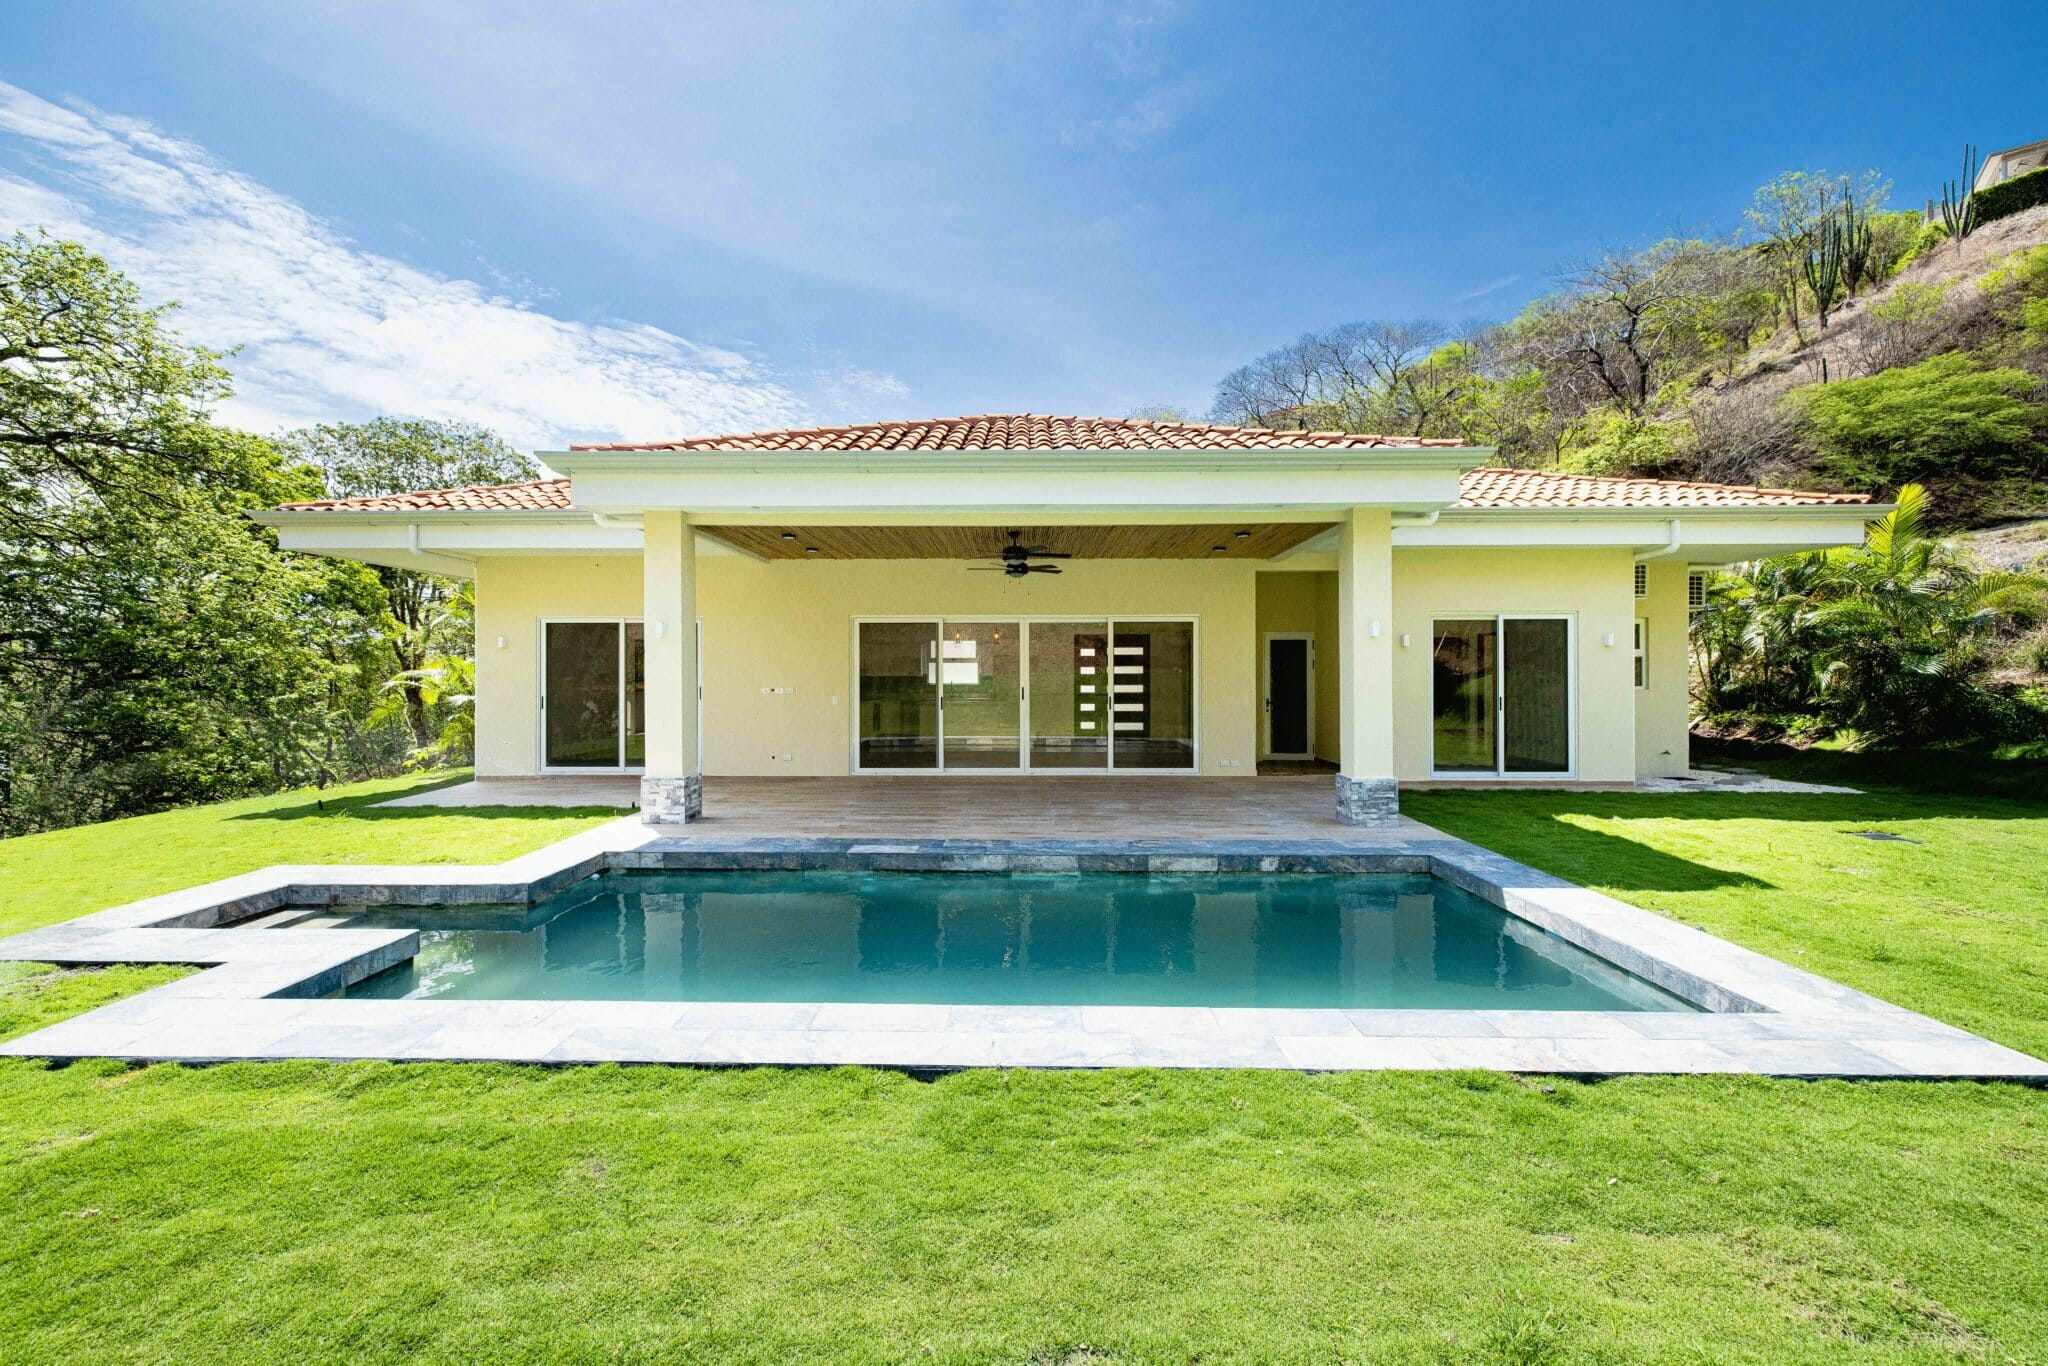 Casa Bosque at Pacifico: A Modern Tropical Oasis with Stunning Views in Playas del Coco – Your Dream Home Awaits!